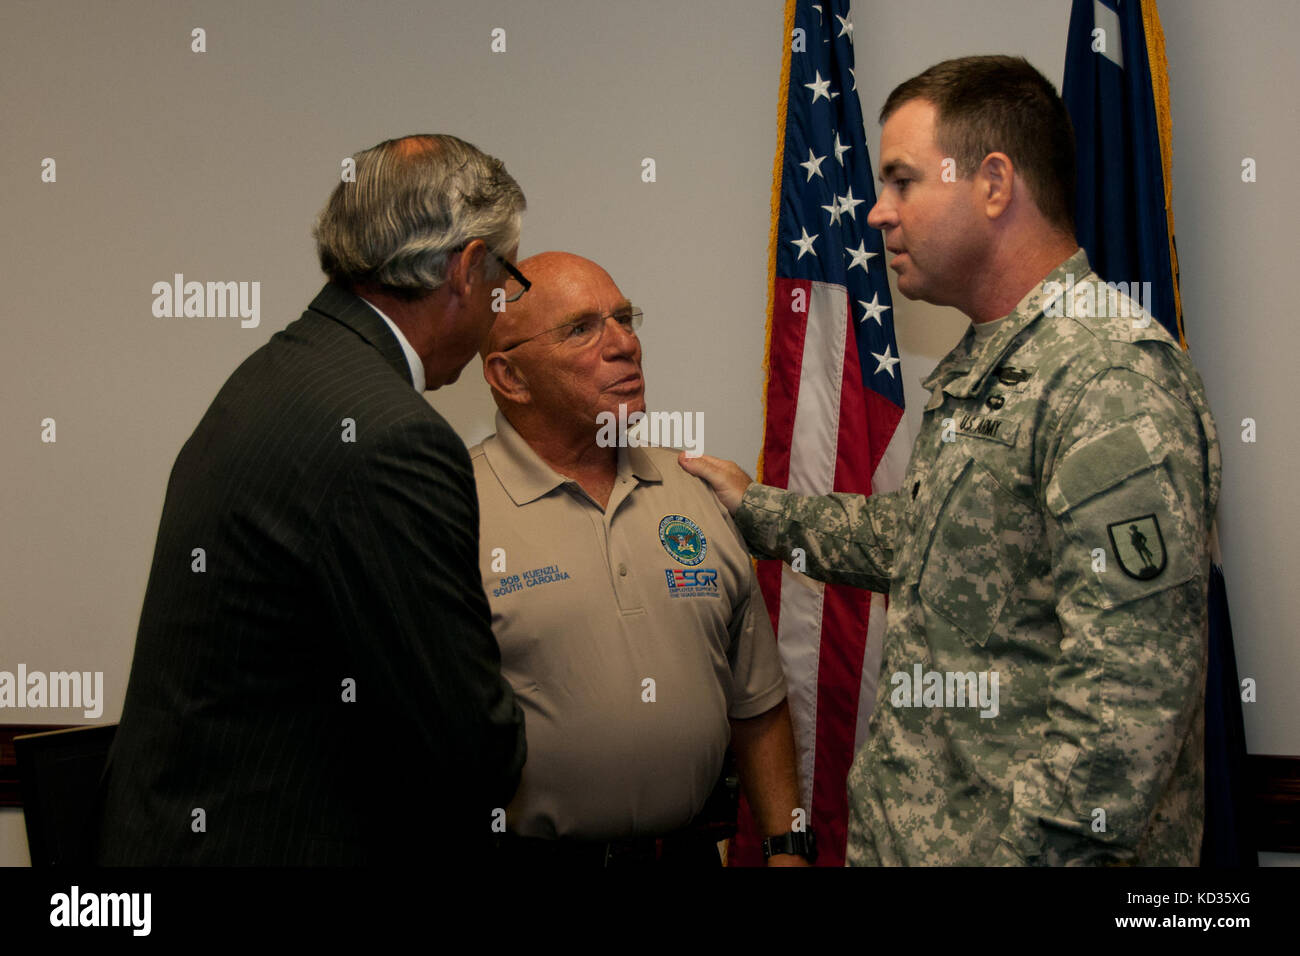 U.S. Army Maj. Gen. Robert E. Livingston, Jr., the adjutant general for South Carolina, presents the South Carolina Employer Support of Guard and Reserve Patriot Award to Mr. Will McMaster of Morgan Stanley at the Joint Force Headquarters building, South Carolina National Guard, Columbia, South Carolina, Aug. 27, 2015. The Patriot award is awarded to individual supervisors who demonstrate exceptional support to National Guard Citizen Soldiers and Airmen who perform their duties to the state and nation. During the event, an ESGR statement of support was signed demonstrating the company’s contin Stock Photo